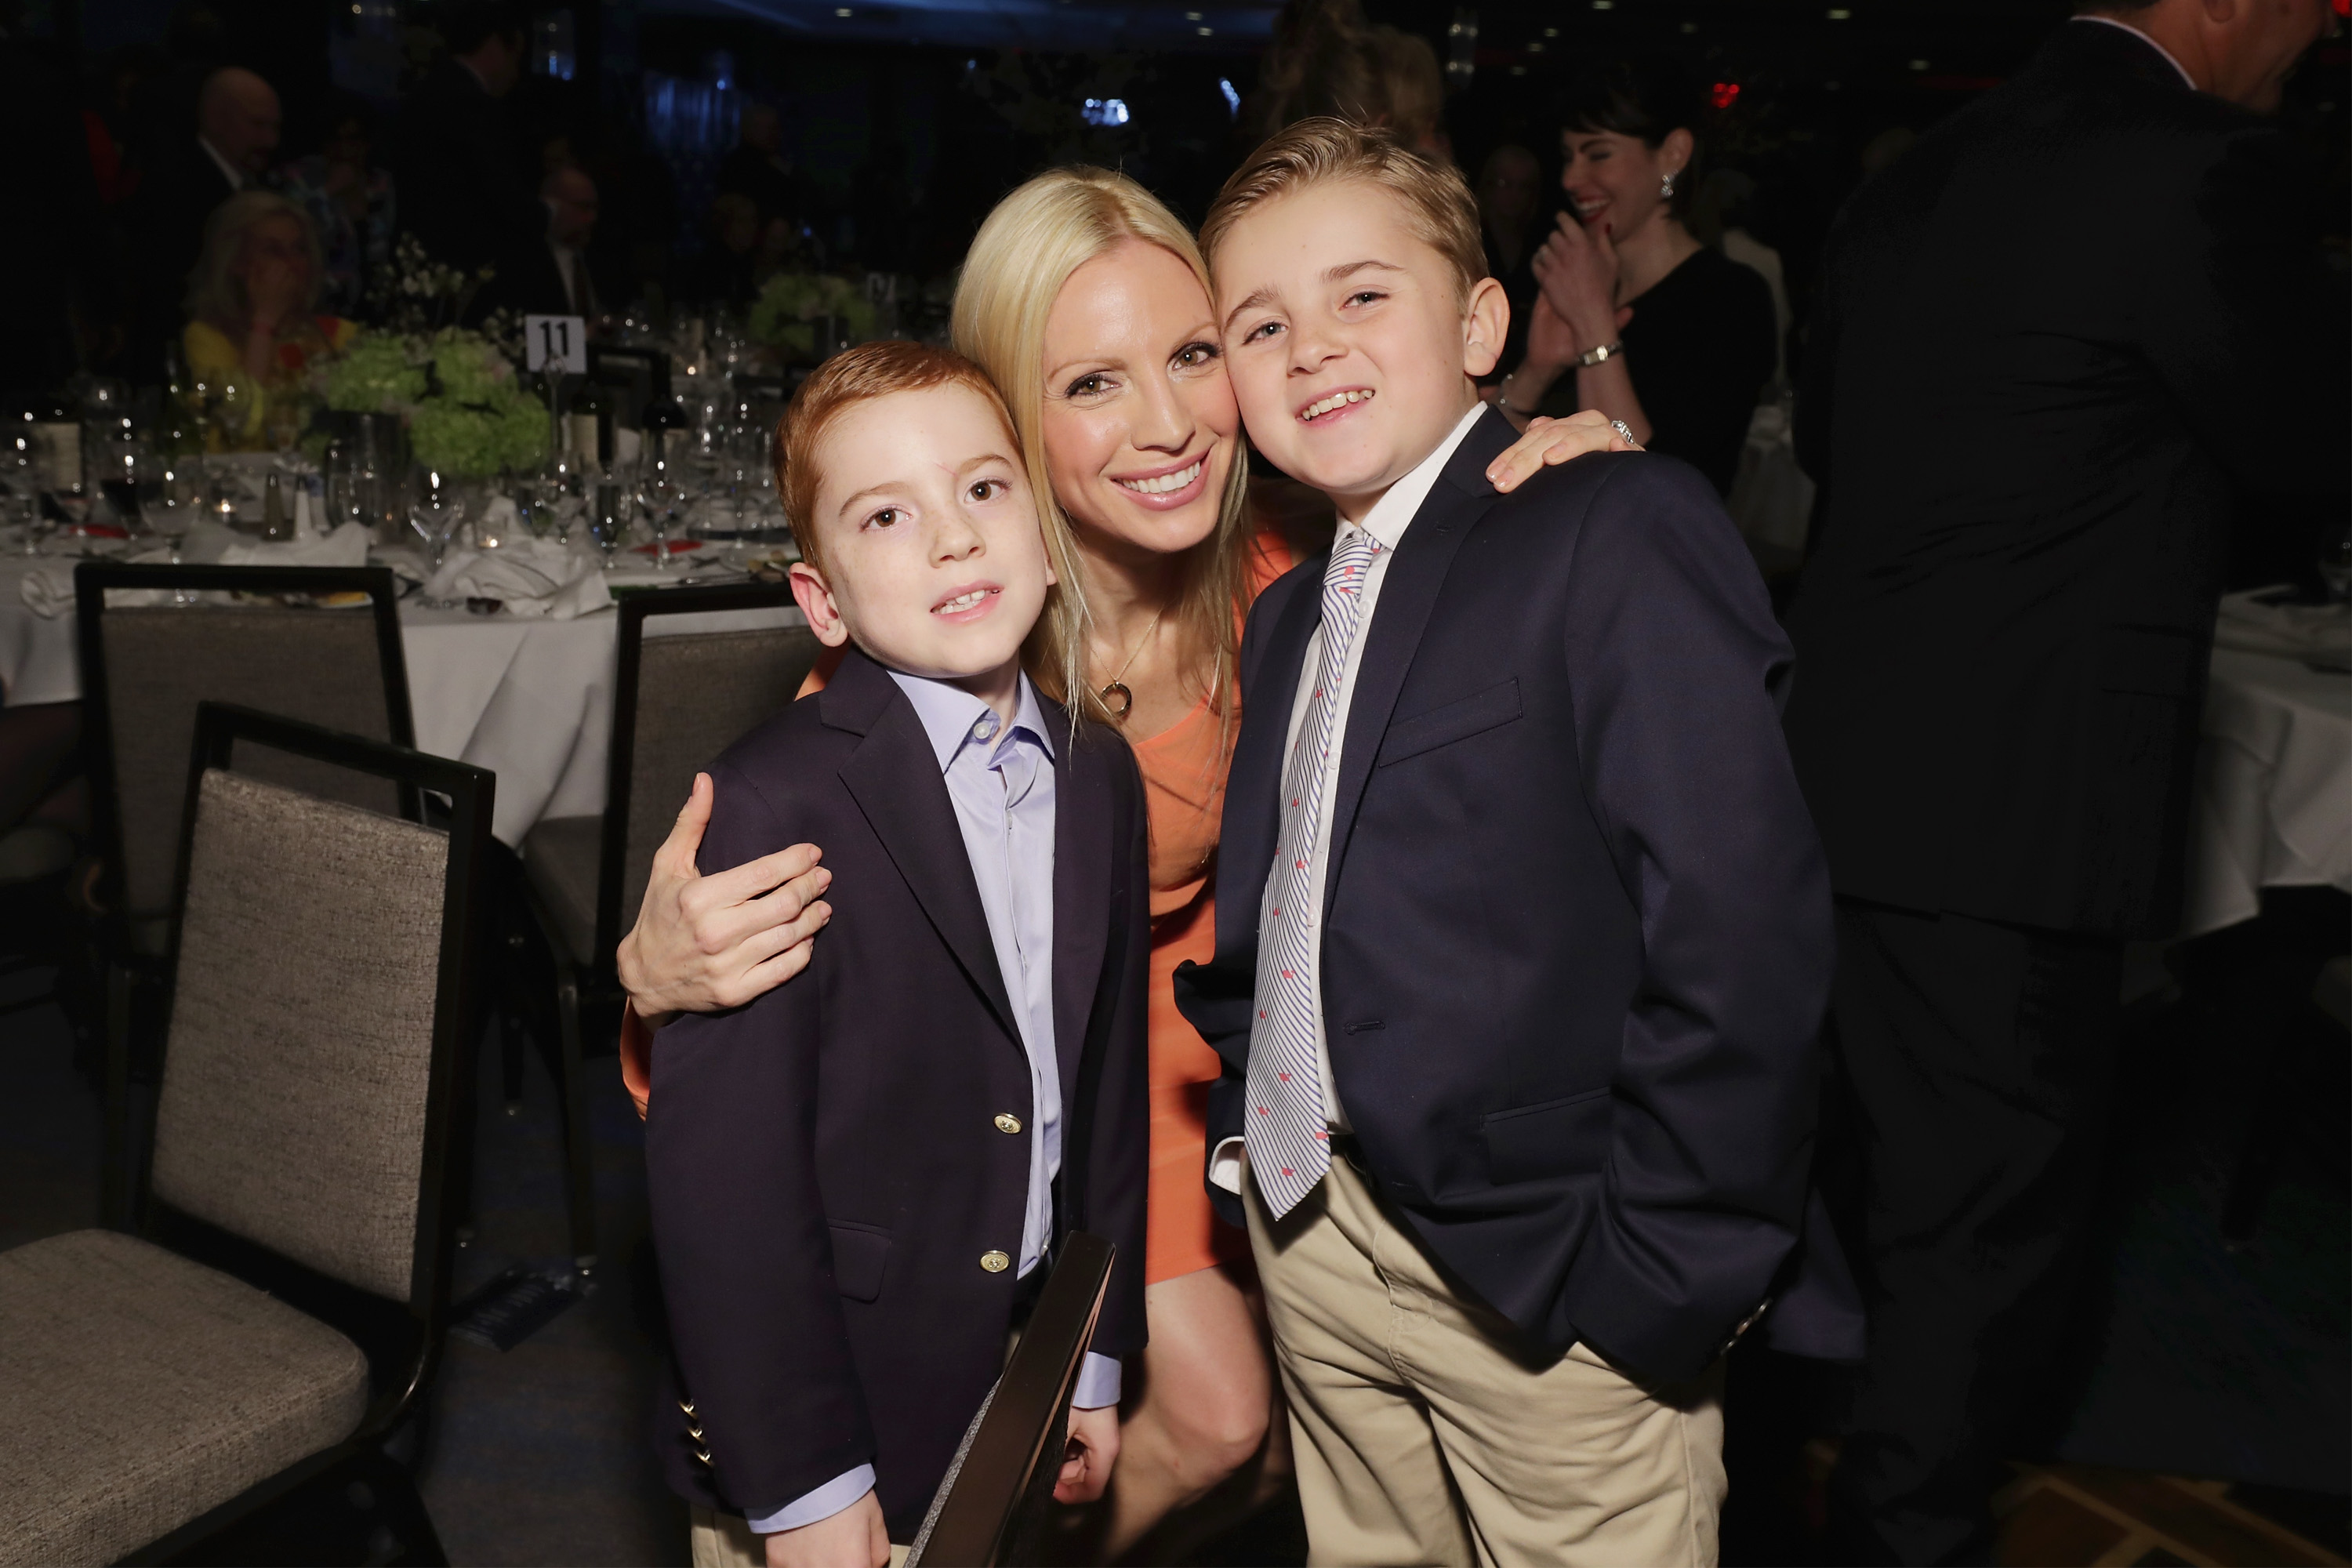 Brendan Hesterberg, Liza Huber, and Royce Alexander Hesterberg attend the UCP of NYC 70th Anniversary Celebration Gala in New York City on March 9, 2017 | Source: Getty Images